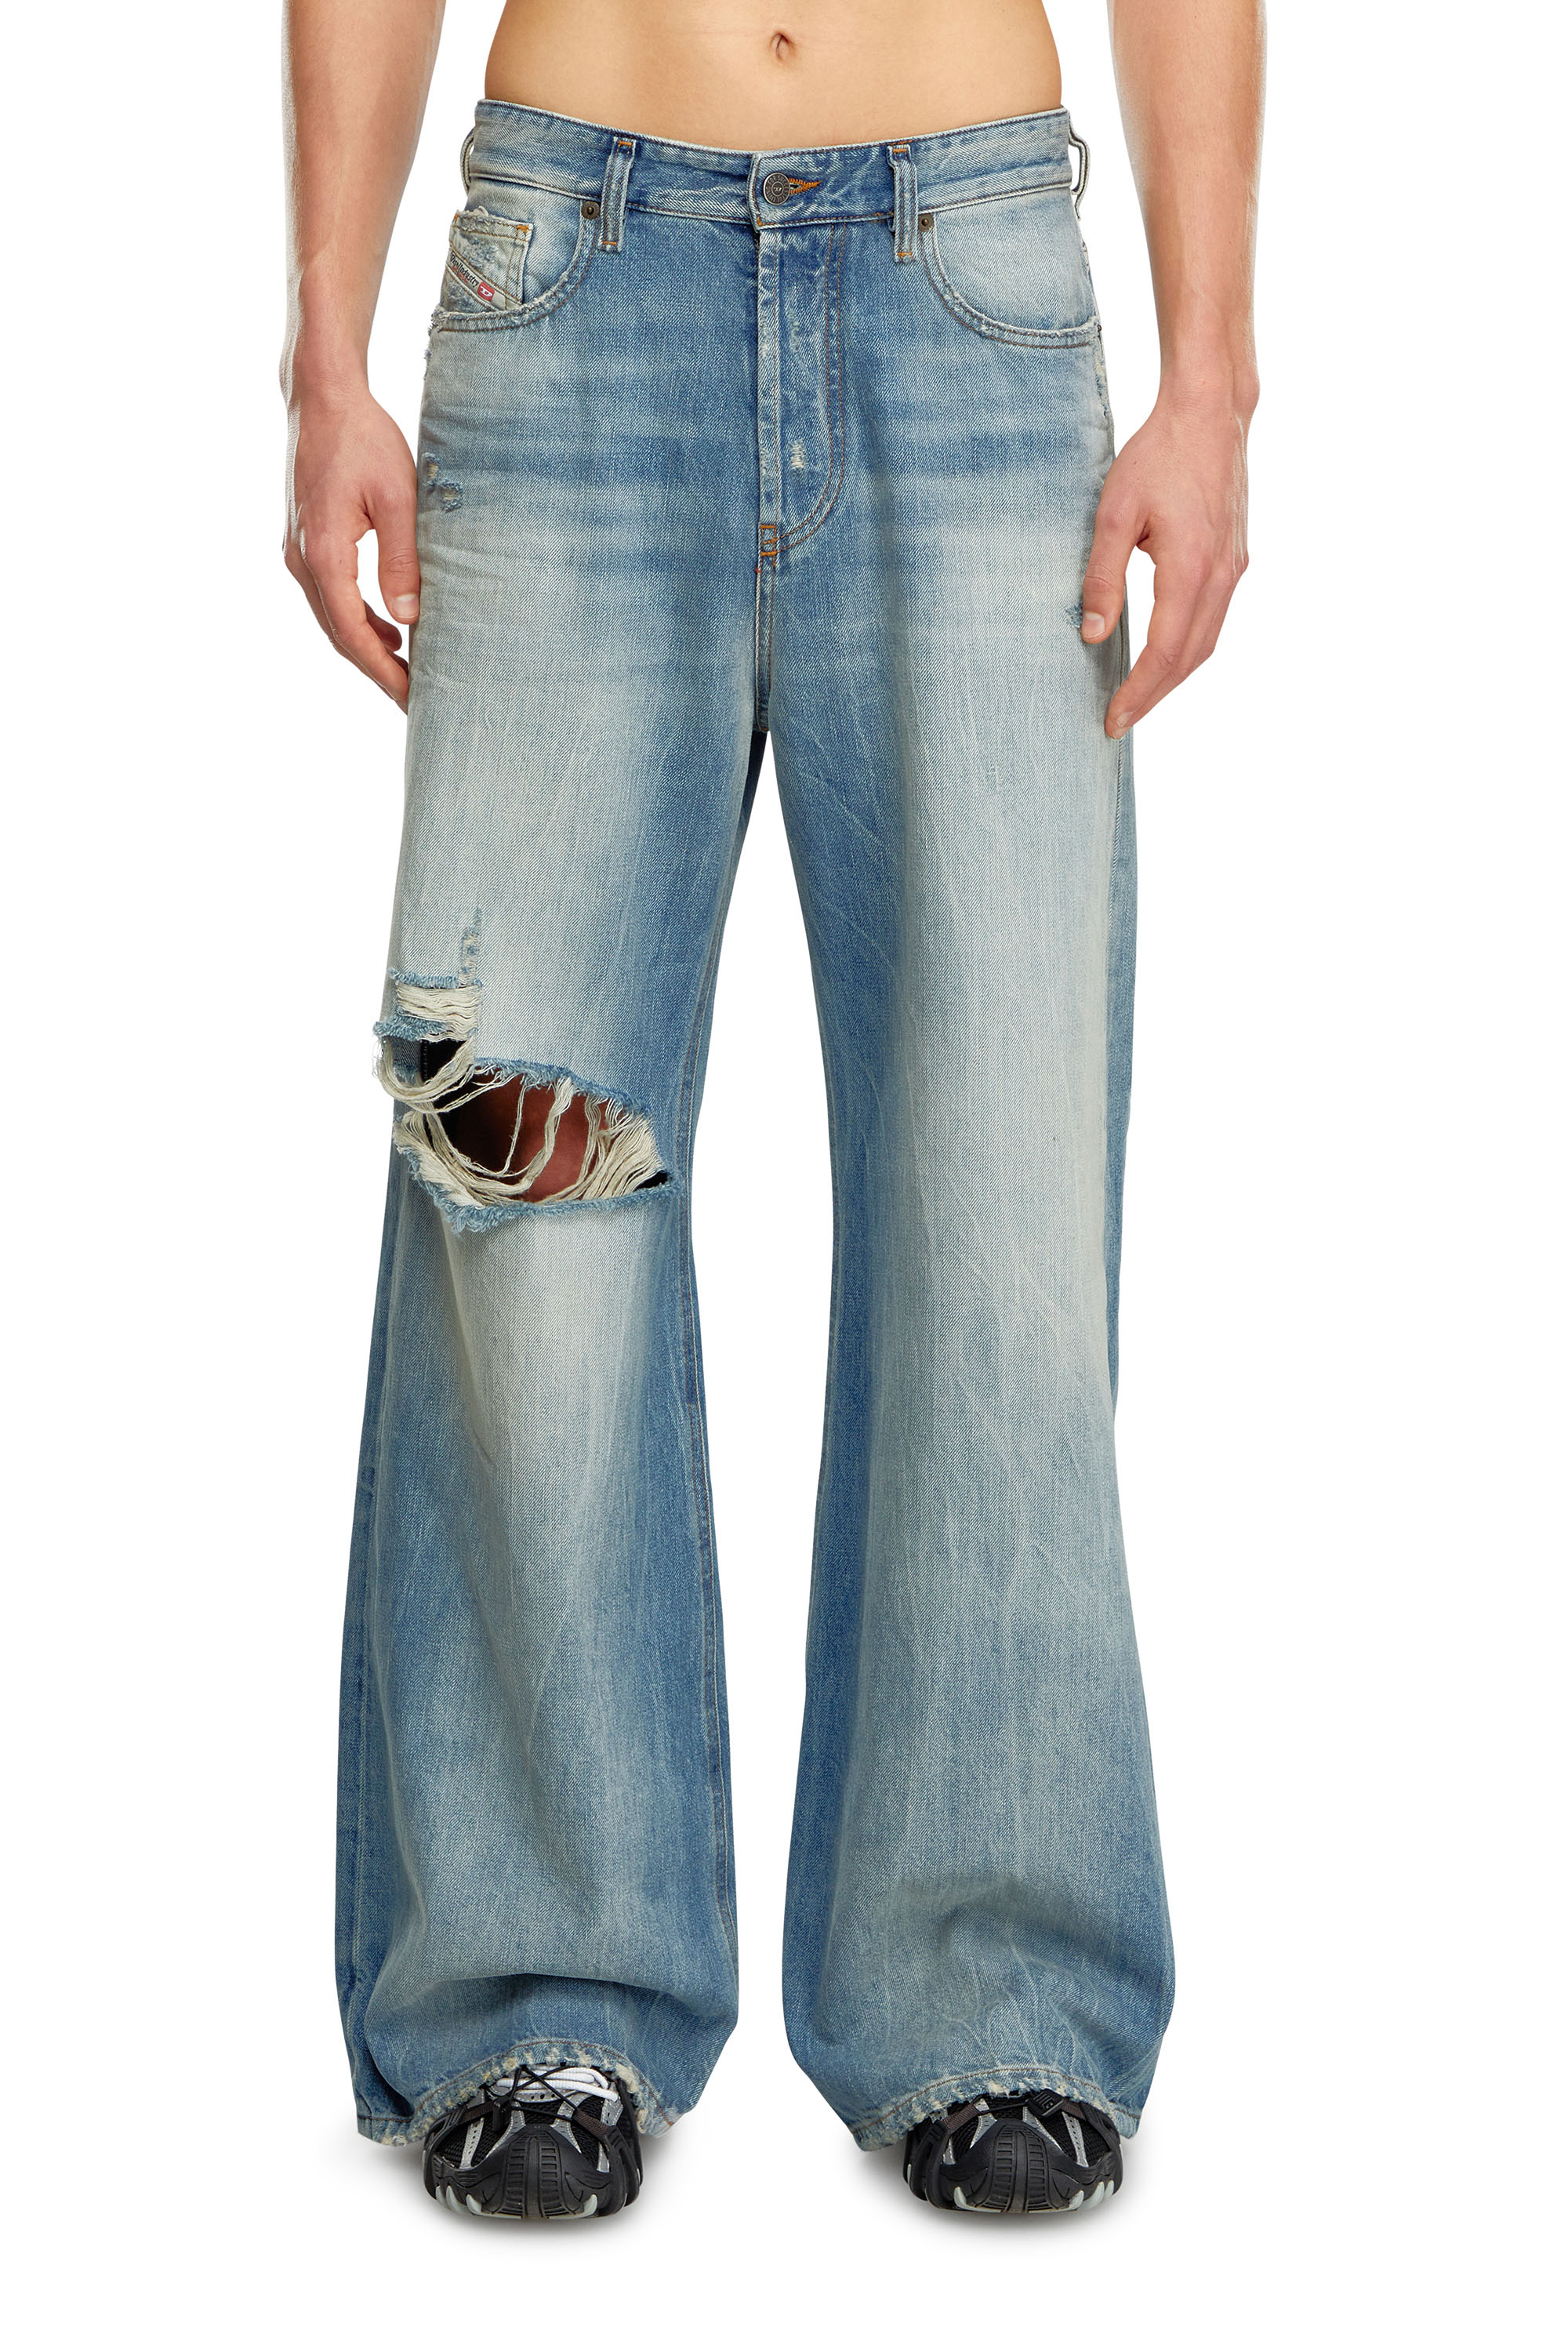 Diesel - Straight Jeans 1996 D-Sire 09H58, Mujer Straight Jeans - 1996 D-Sire in Azul marino - Image 6